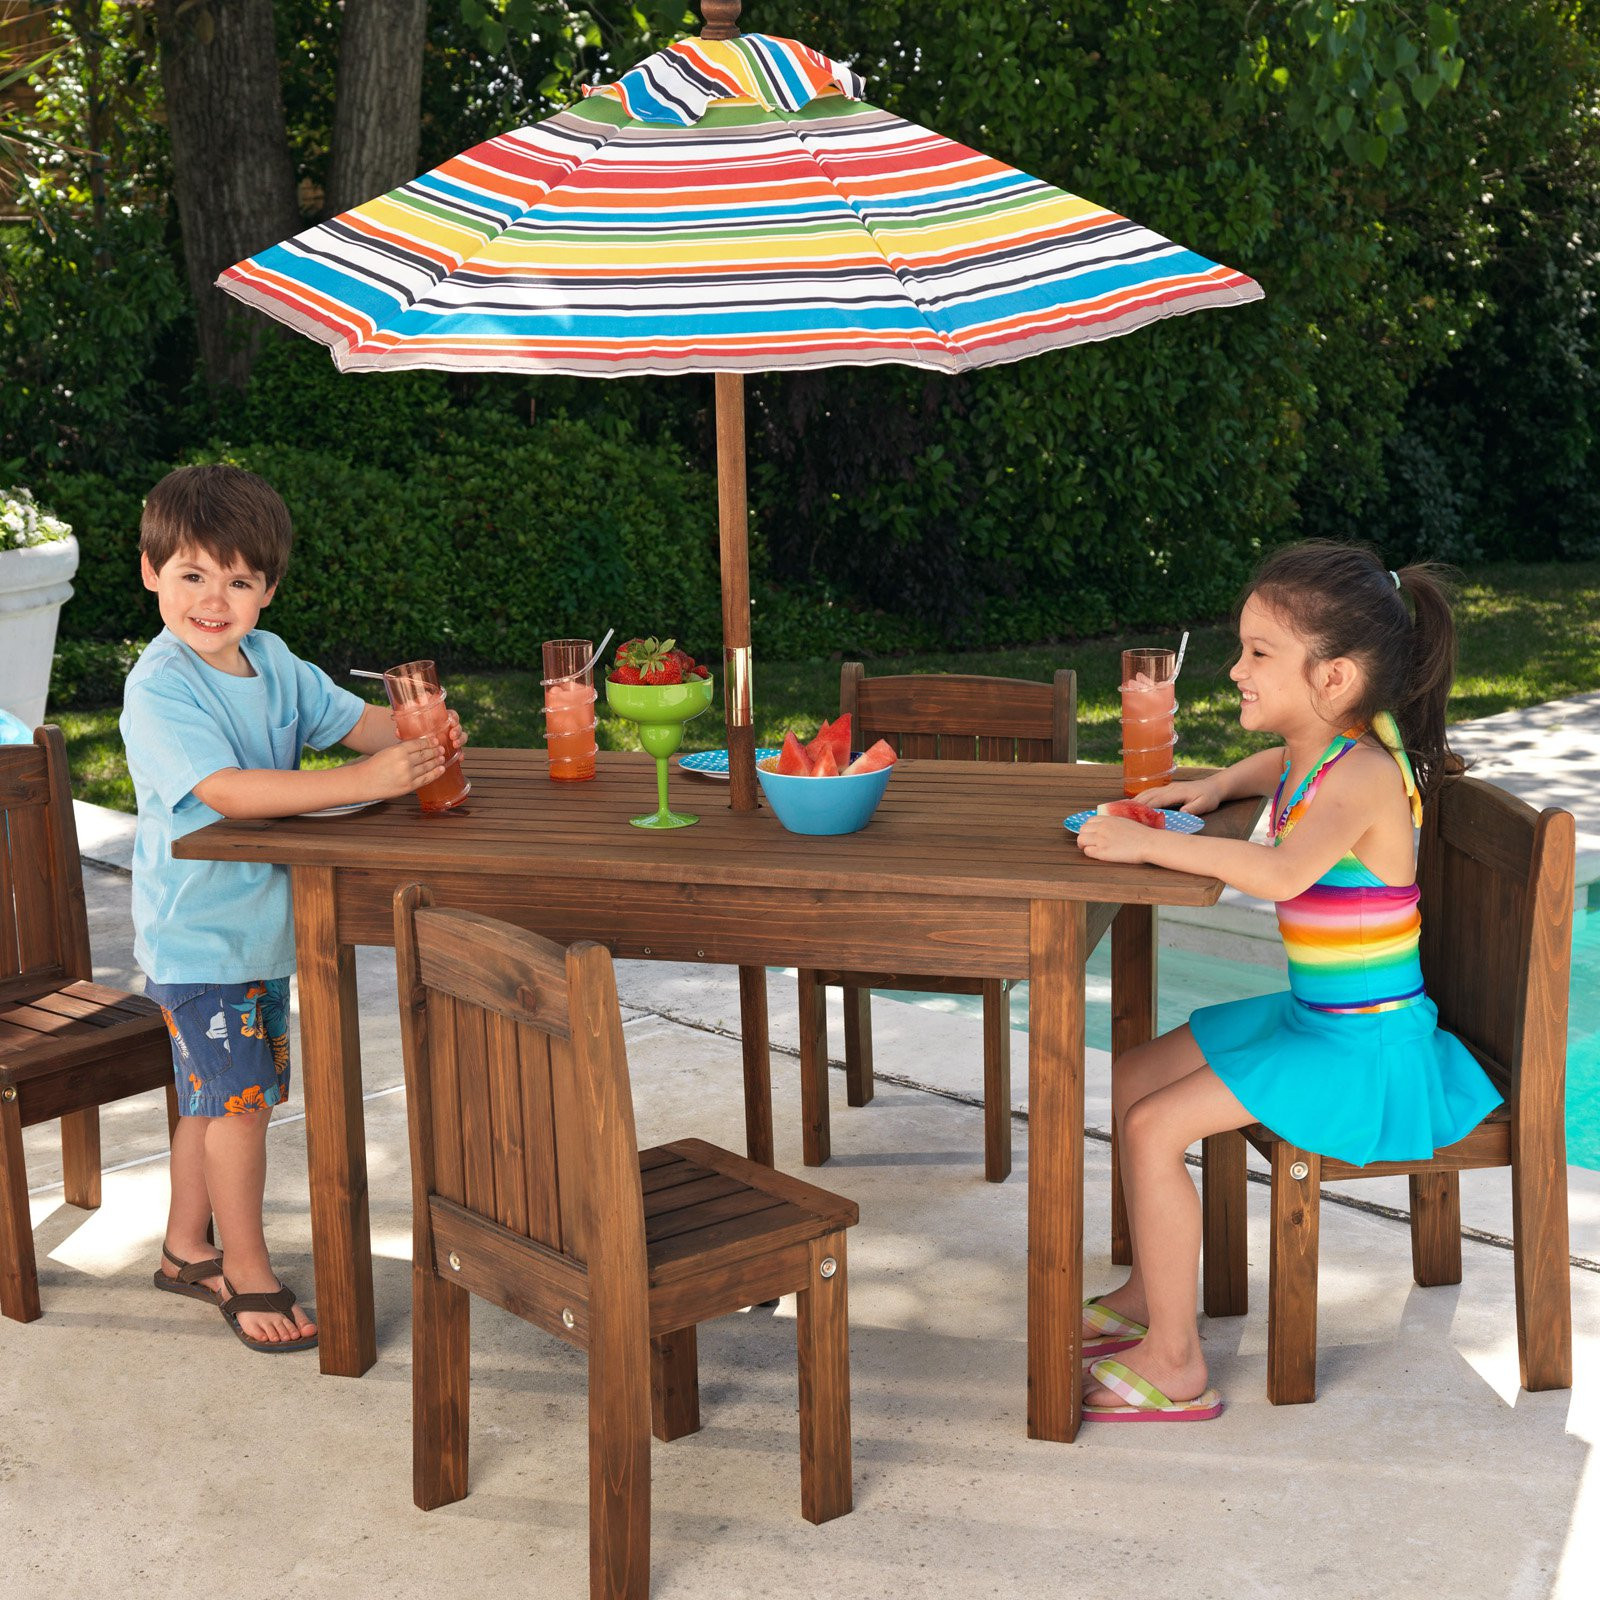 Kids Outdoor Table And Chairs
 KidKraft Outdoor Table and 4 Stacking Chairs with Striped